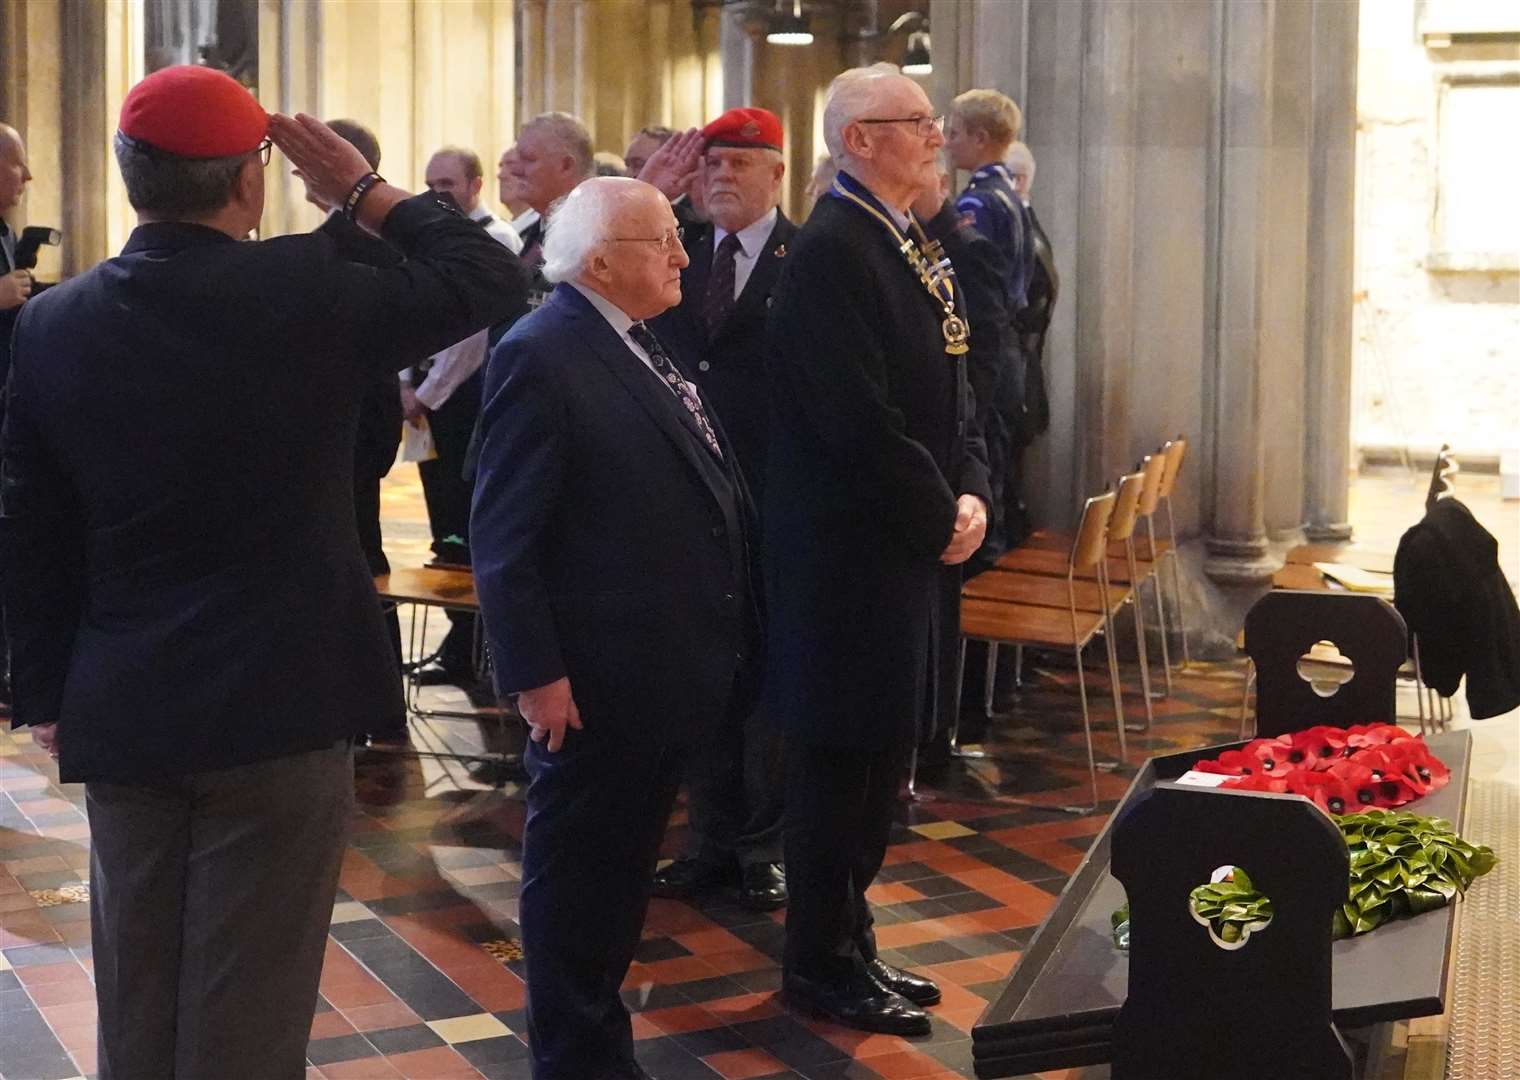 British Legion District President Lt Col Ken Martin and President Michael D Higgins lay wreaths at the Remembrance Sunday service at Saint Patrick’s Cathedral in Dublin (Niall Carson/PA)